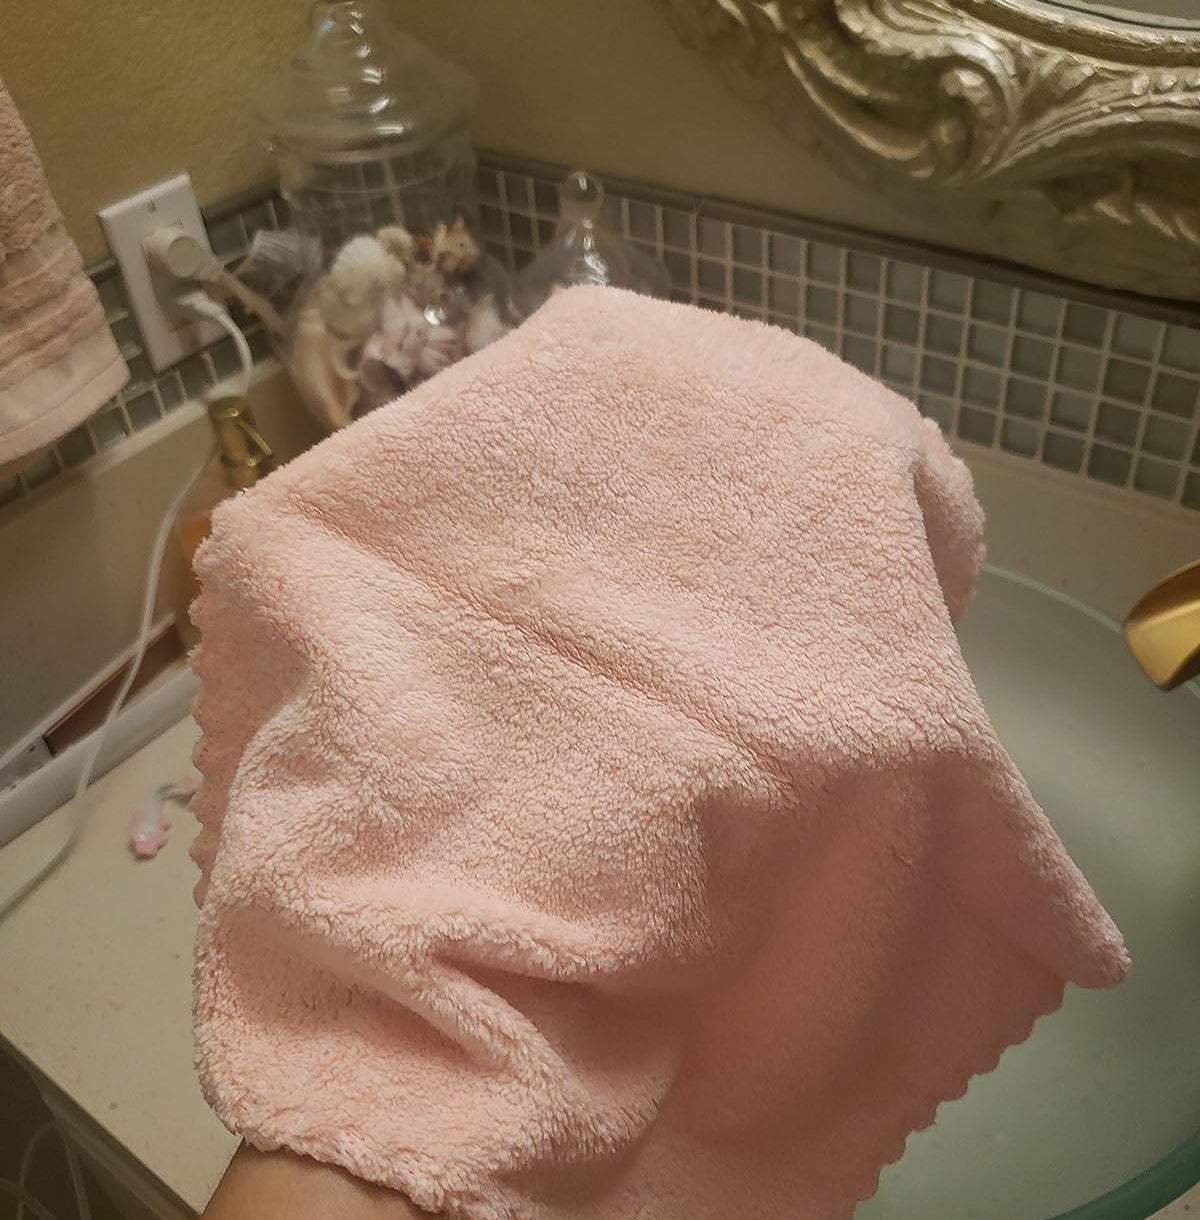 Reviewer holding the pink microfiber cloth